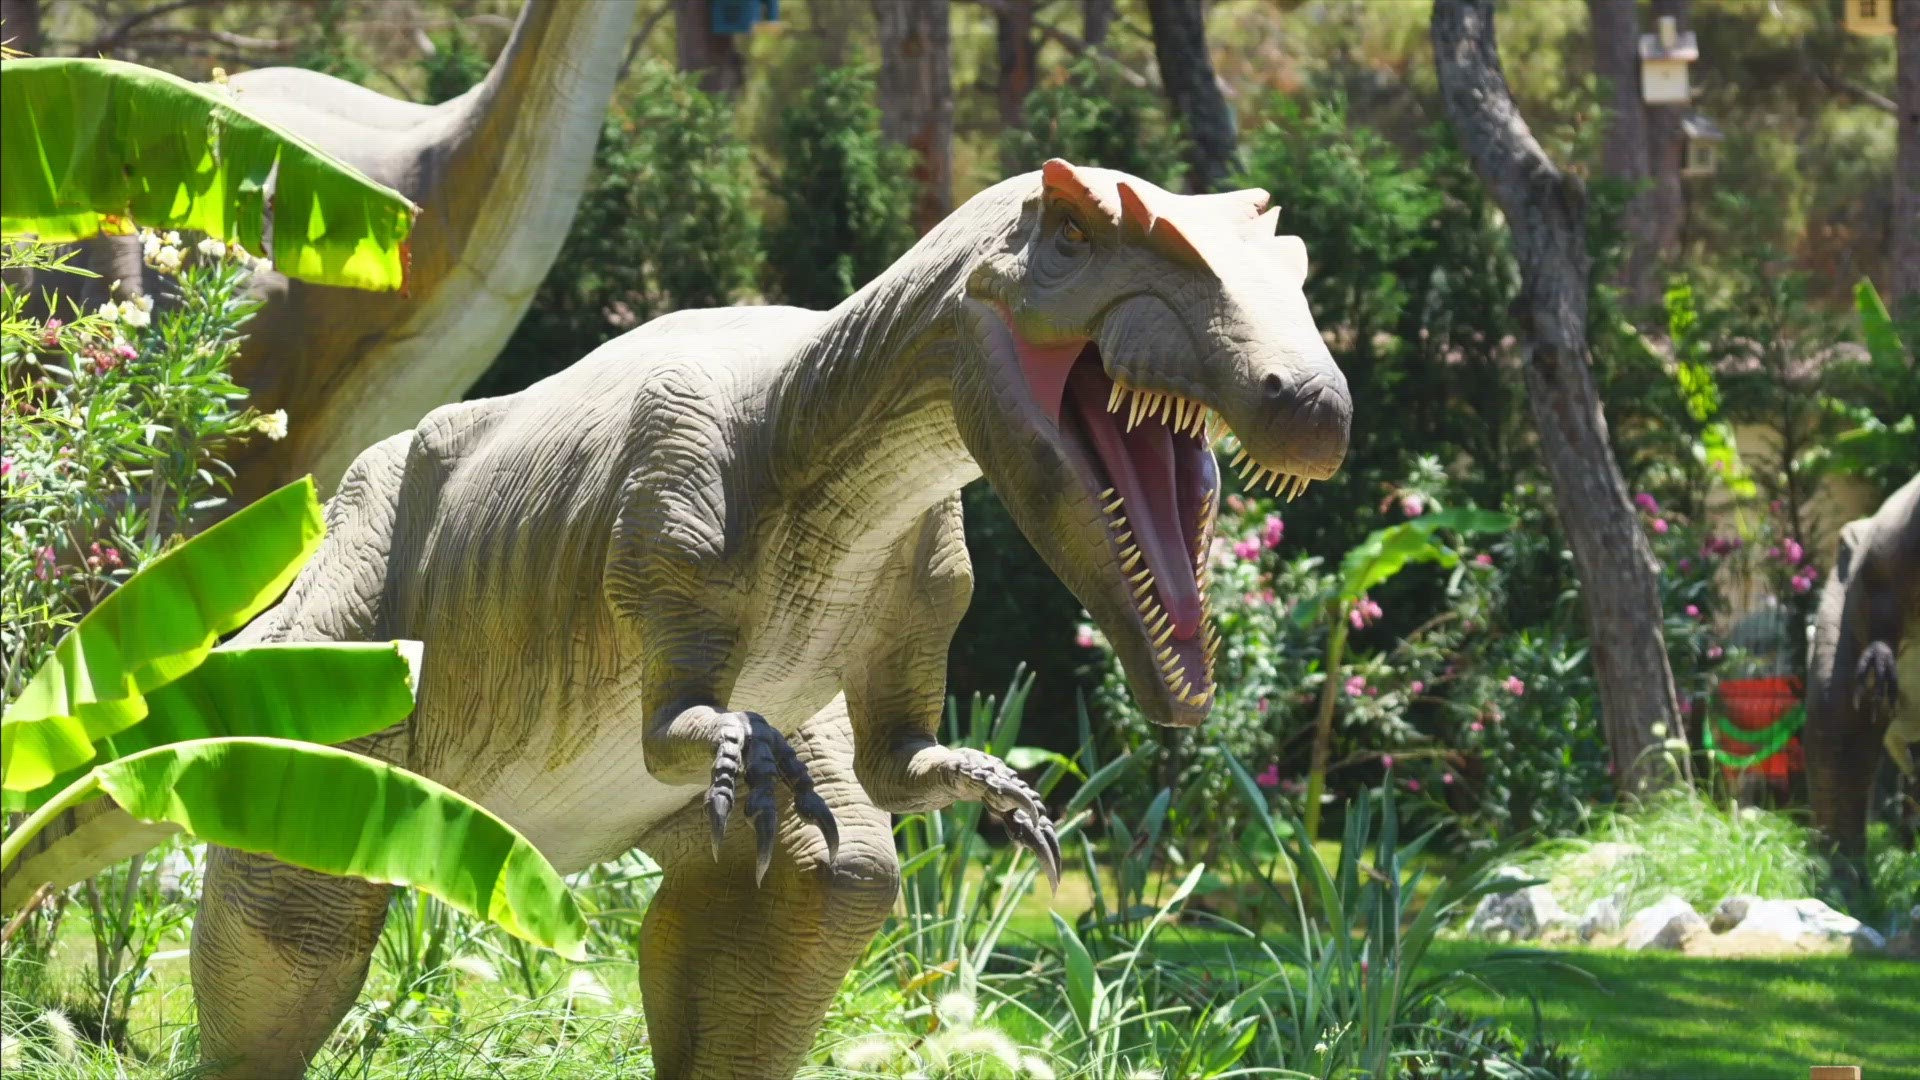 Care to have your own Jurassic Park experience? Buzz60's Maria Mercedes Galuppo has the story.